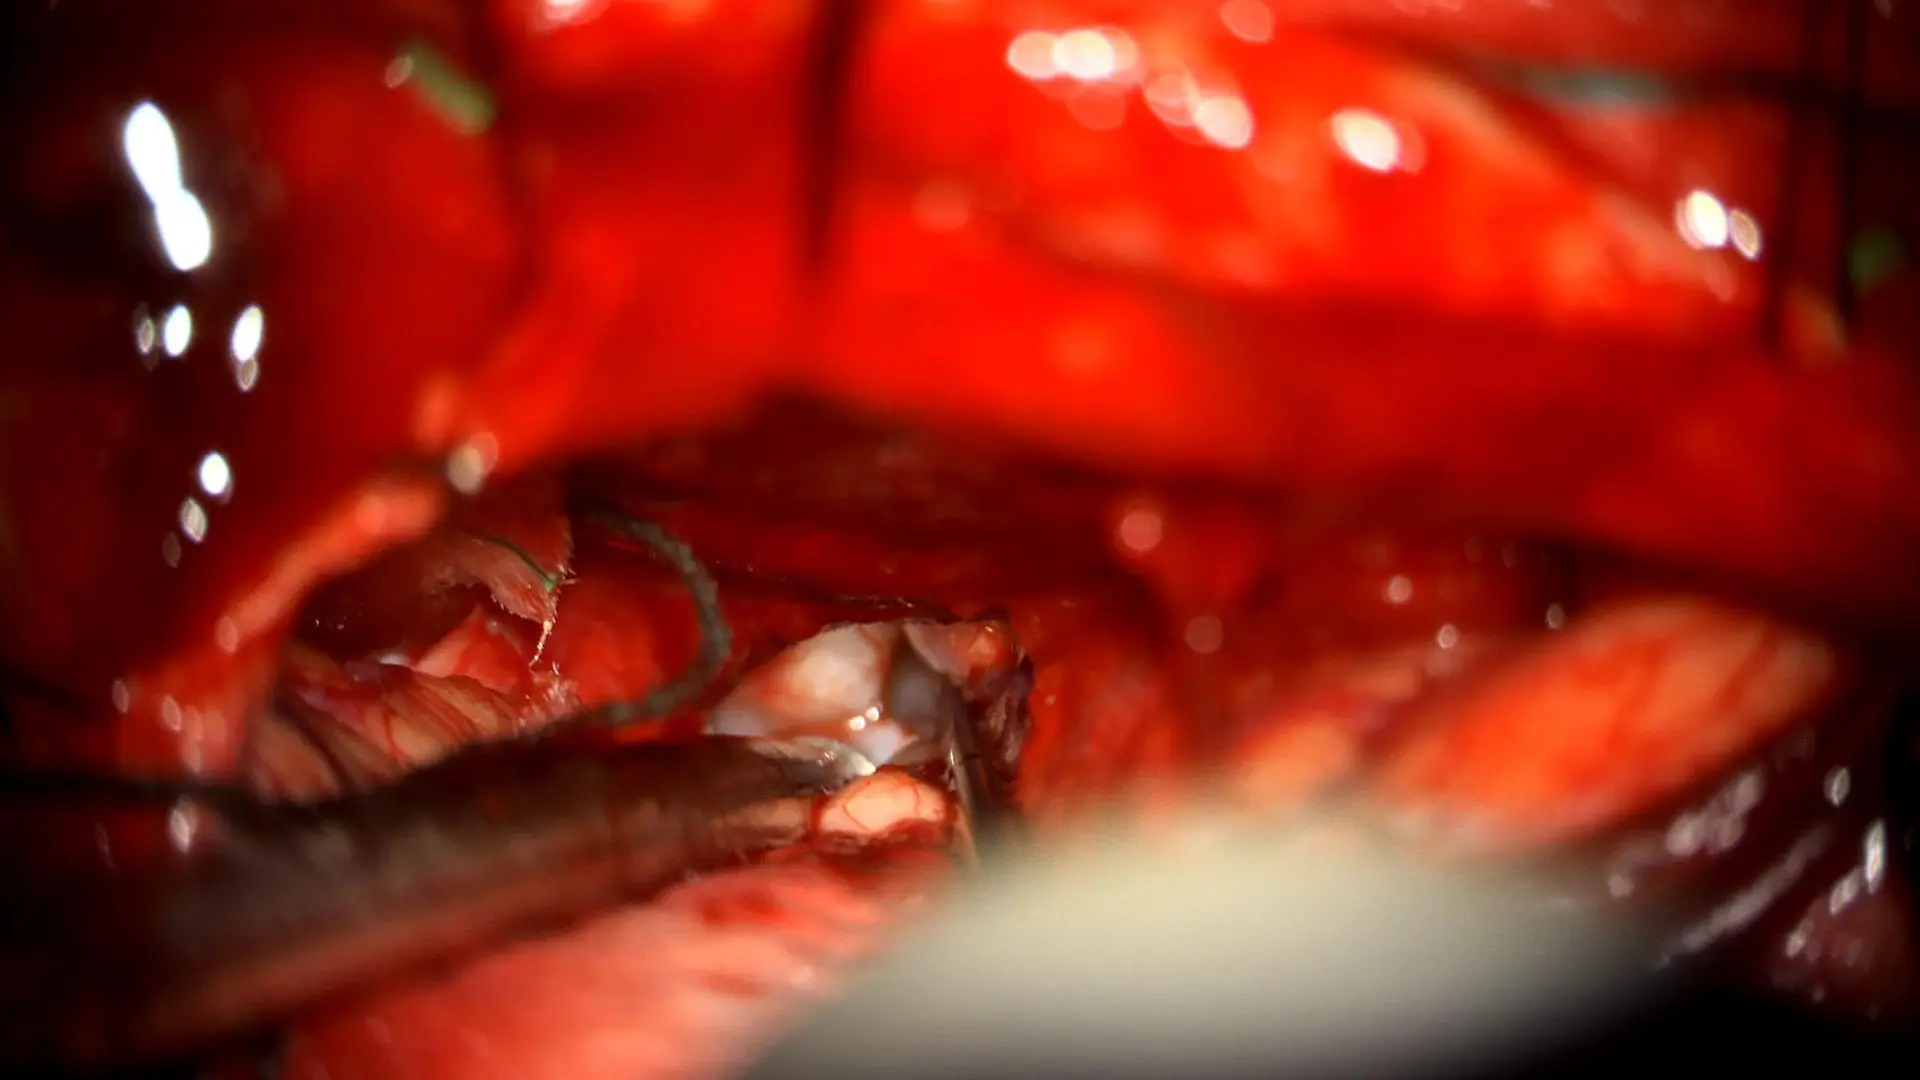 A posterior interhemispheric transcallosal approach was used to access the residual tumor in the third ventricle.